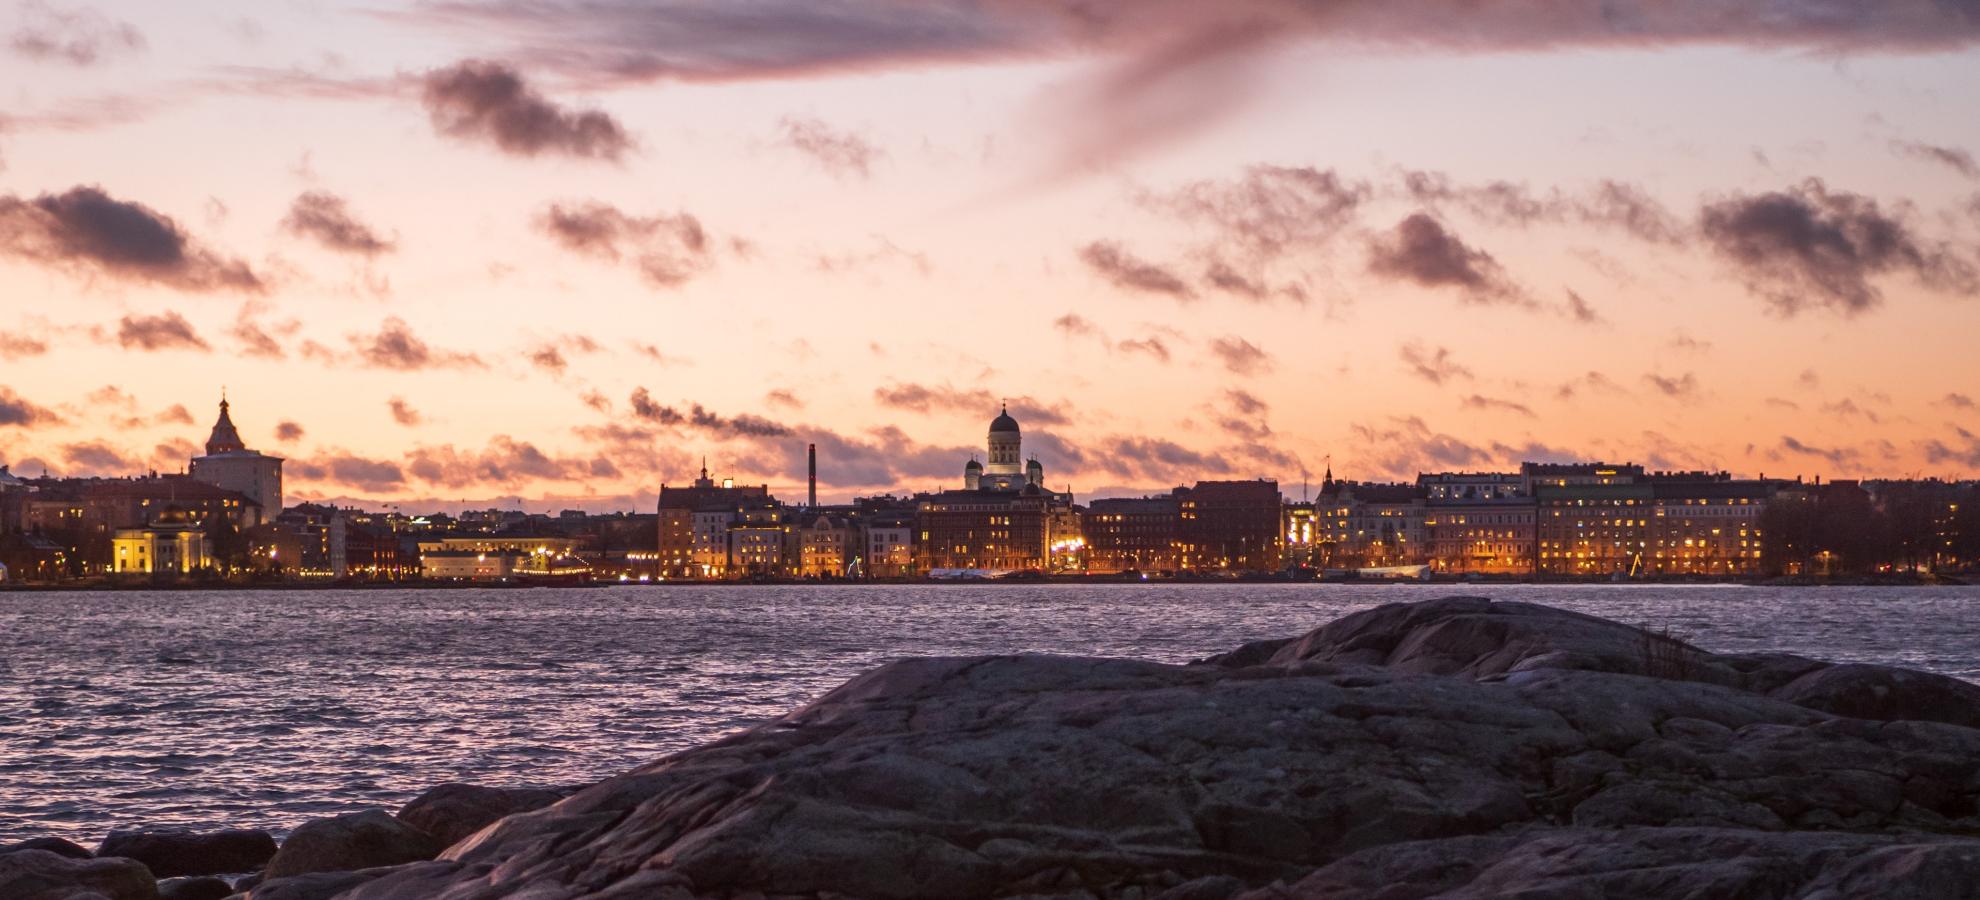 A view of Helsinki from a rocky shoreline during dusk with a pink sky. Helsinki Cathedral can be seen on top of the cityscape on the coastline in the distance. 